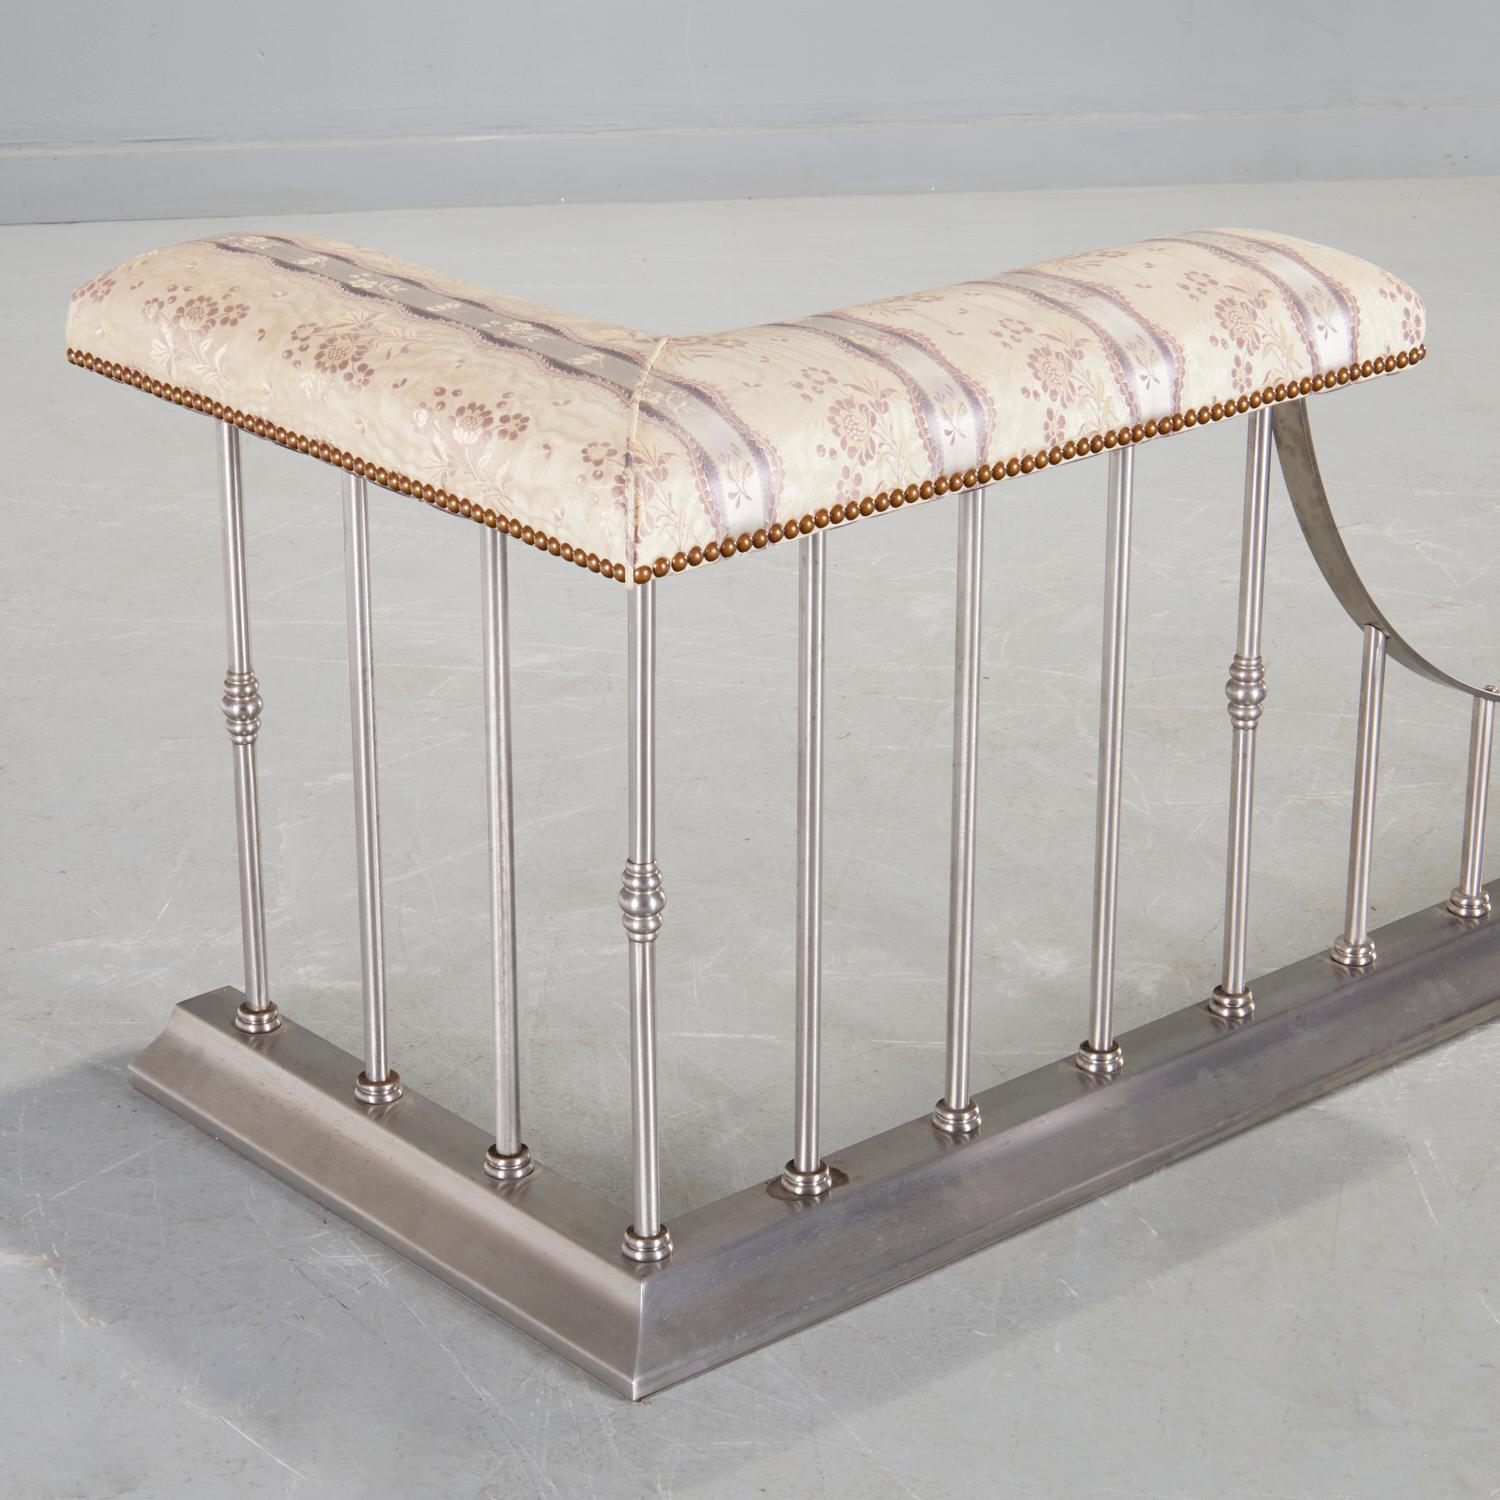 20th c., an Edwardian style English club fireplace fender with a modern twist. Made of steel with a padded silk taffeta seat board with nailhead trim, this fender is a sleek and elegant form of a traditional staple of the English country house, The